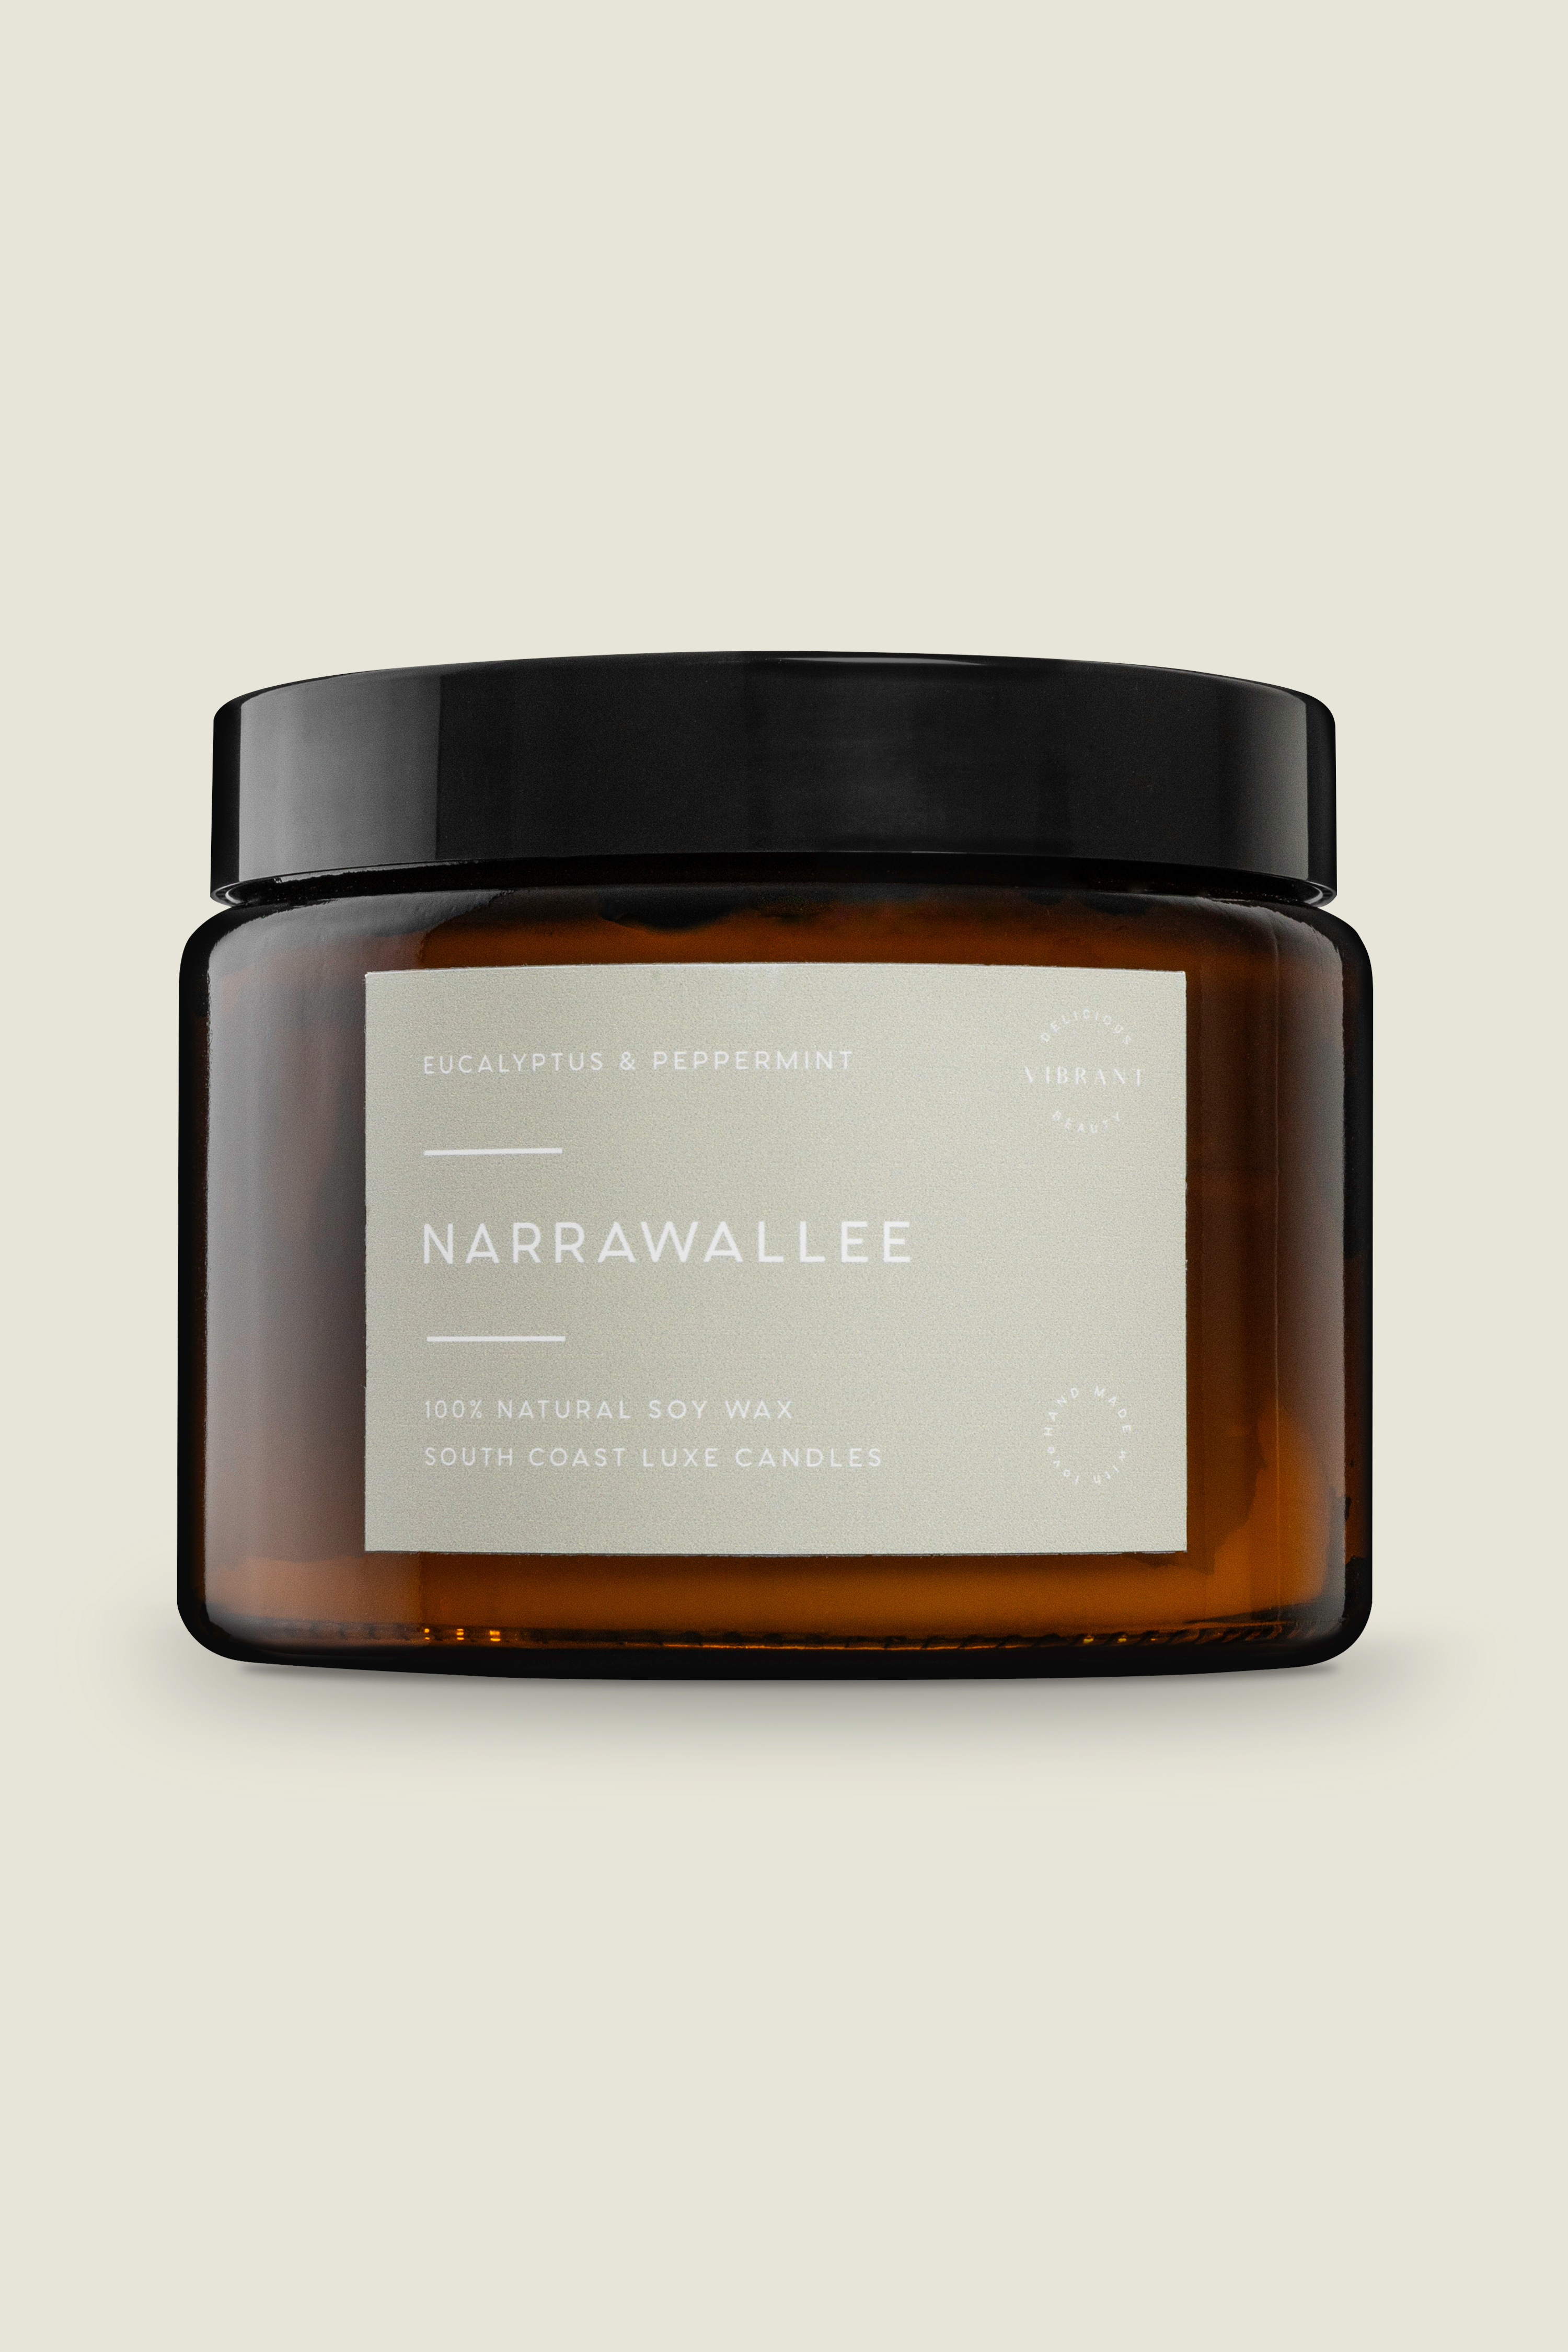 Narrawallee Candle - Eucalyptus, Clove and Peppermint - Large